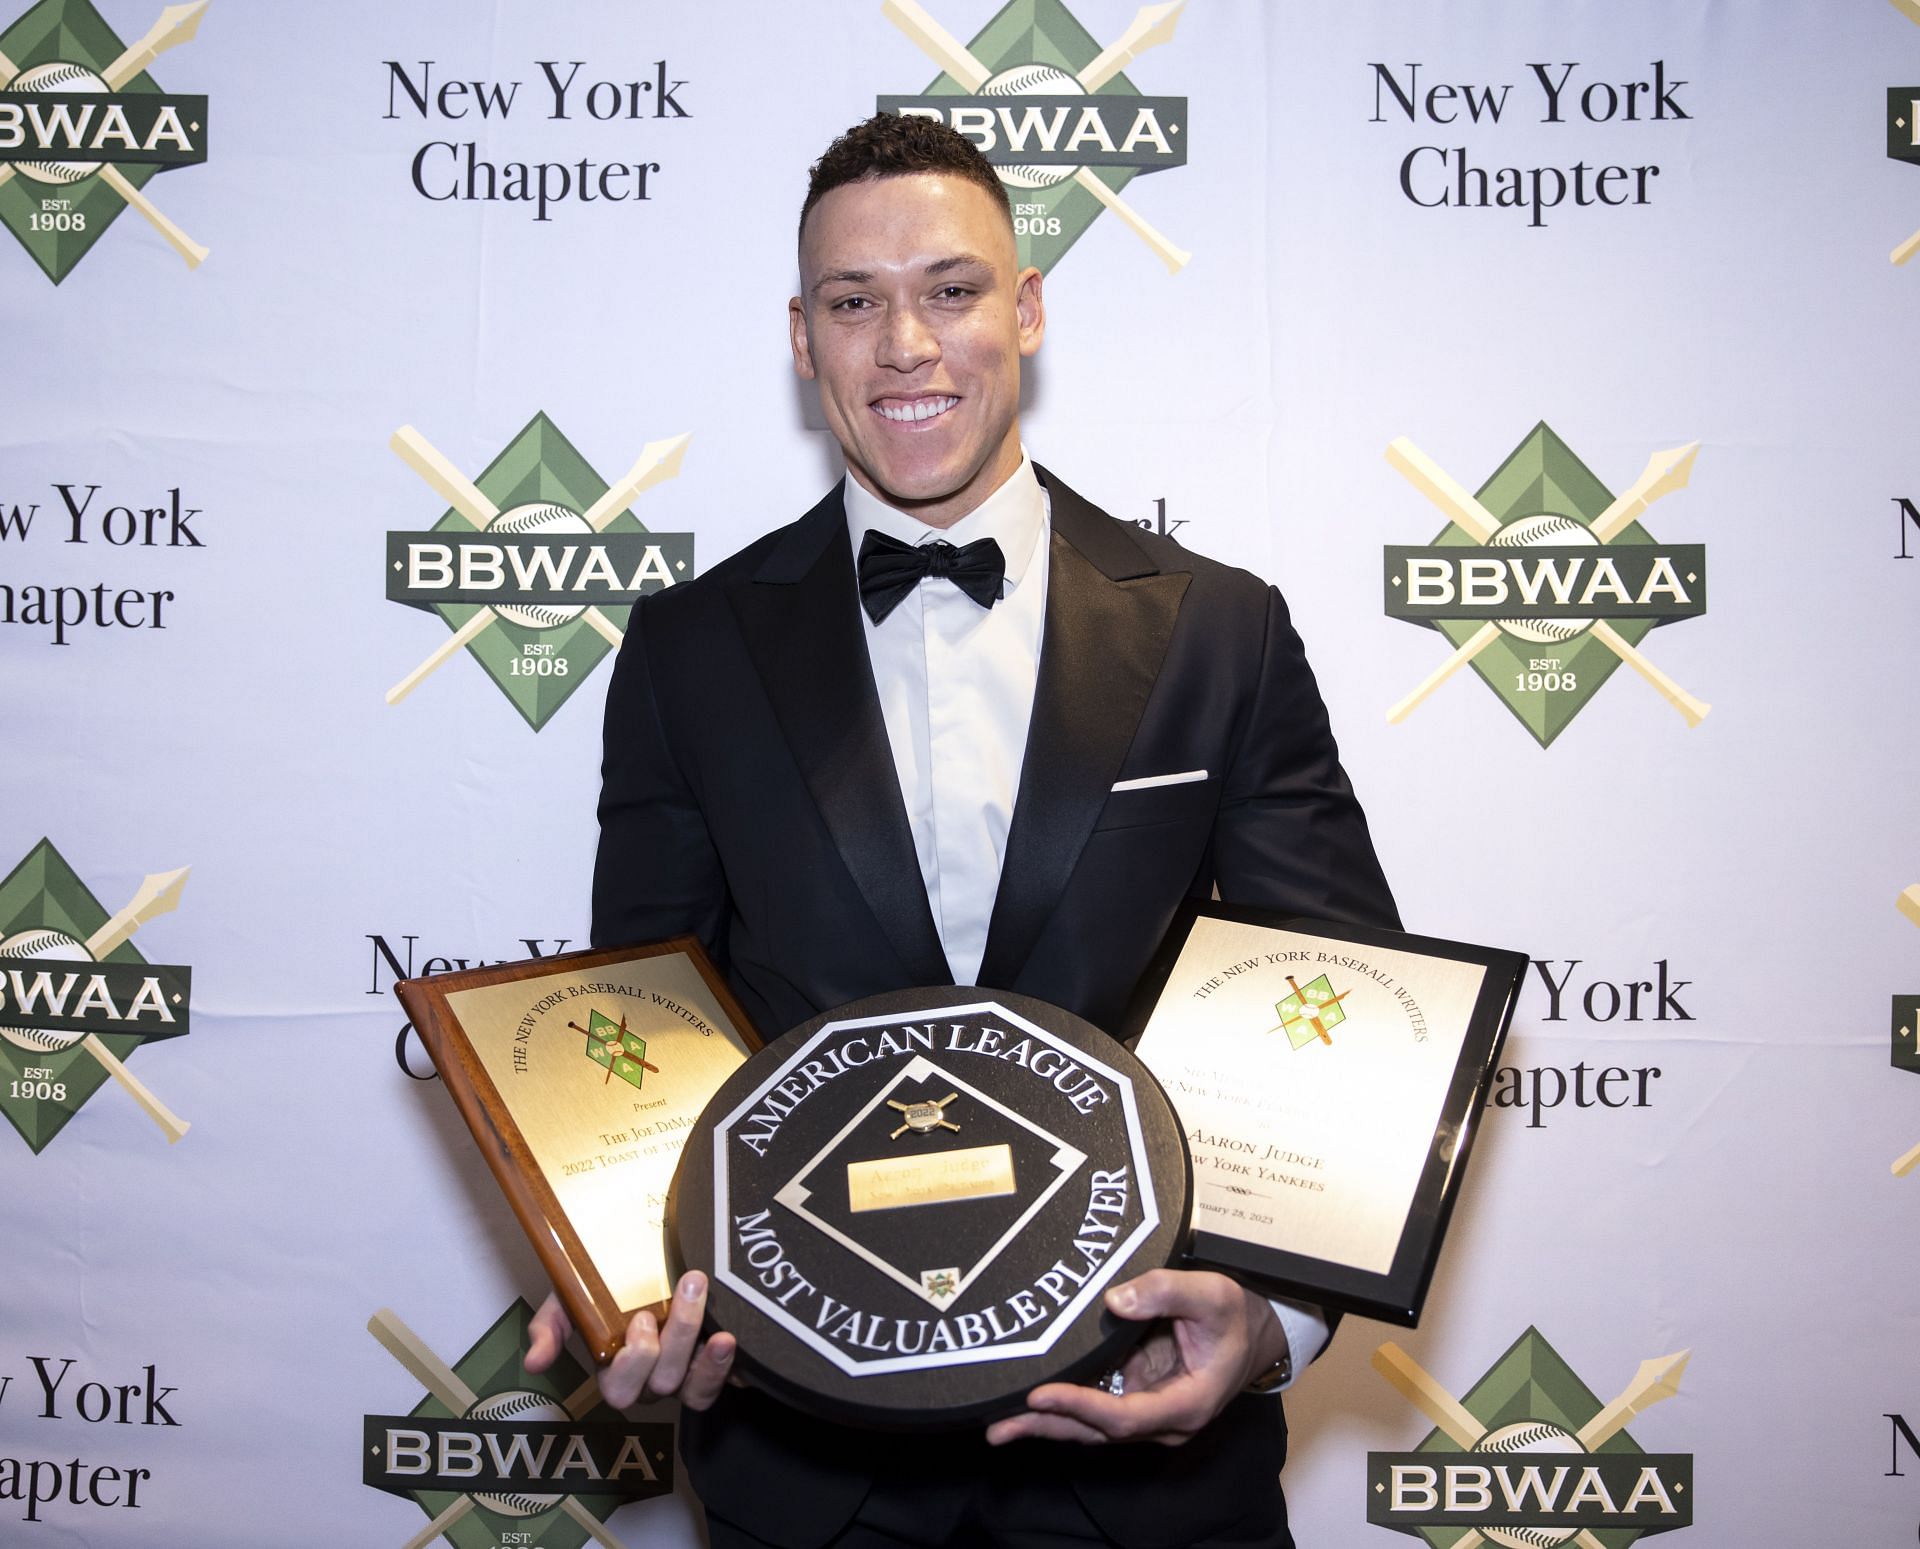 To the Countless Hours They Spent…” - Yankees Captain Aaron Judge Gets  Candid With an Emotional Message on Mother's Day - EssentiallySports